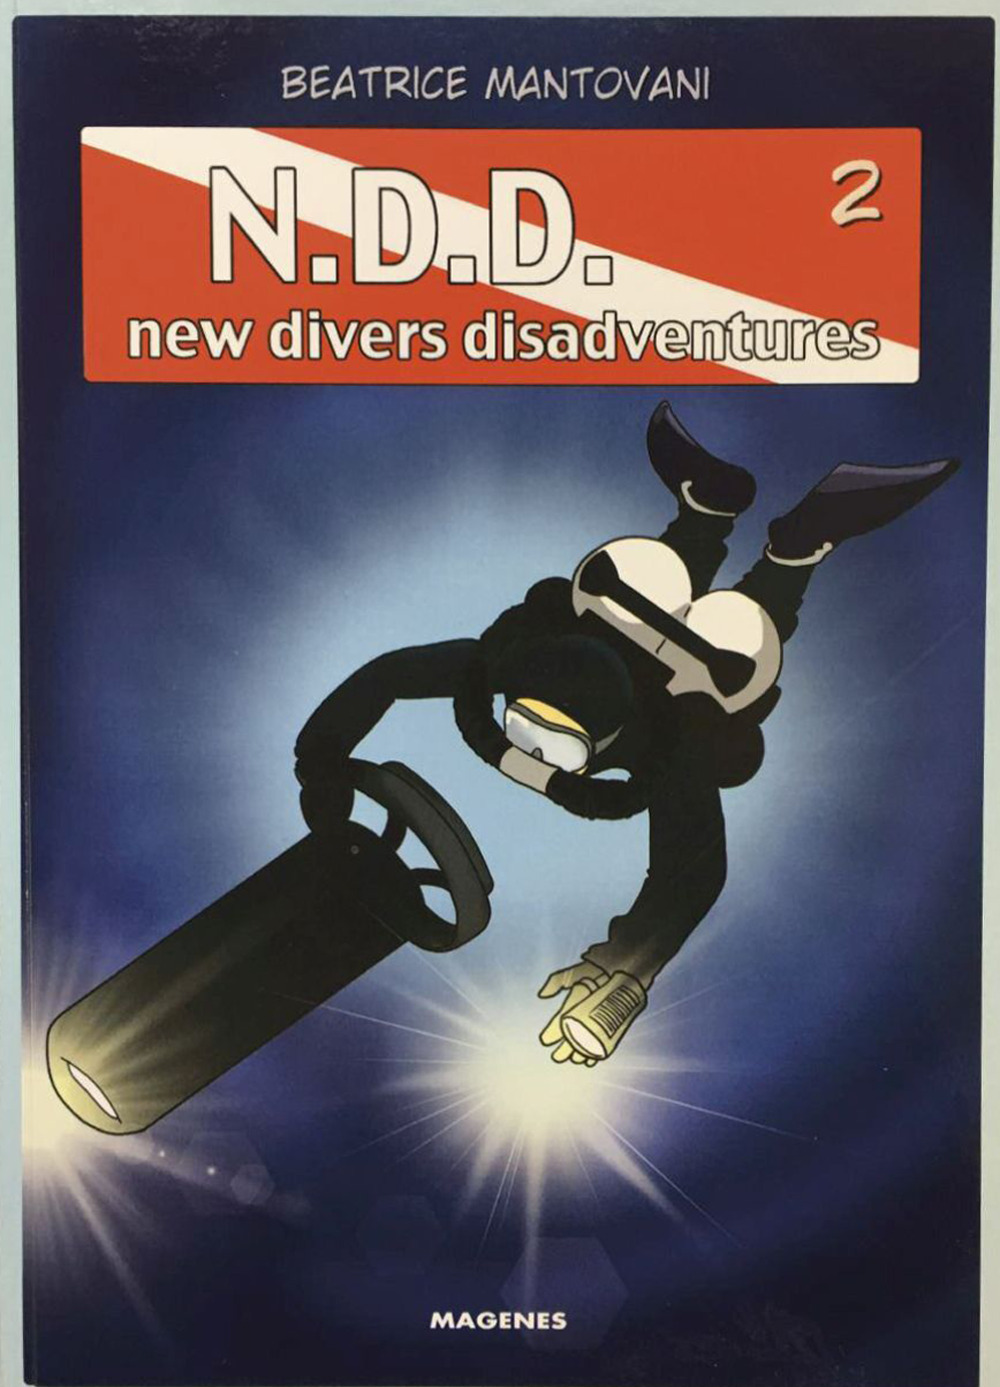 Much divers for nothing. N.D.D. New divers disadventures. Vol. 2